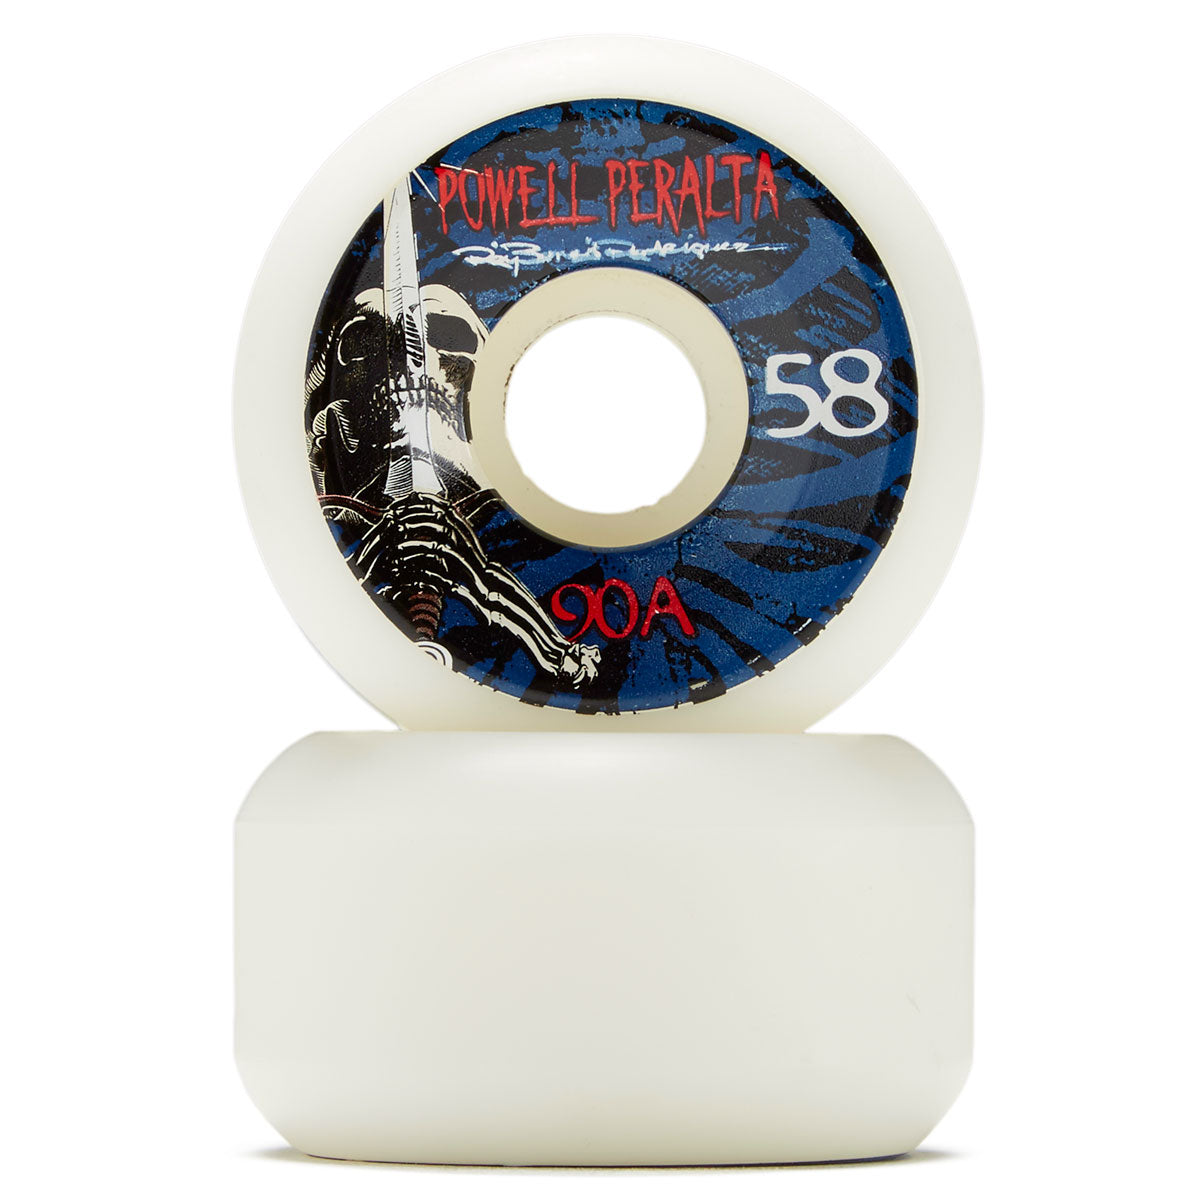 Powell-Peralta Skull and Sword 3 90A Skateboard Wheels - White - 58mm image 2